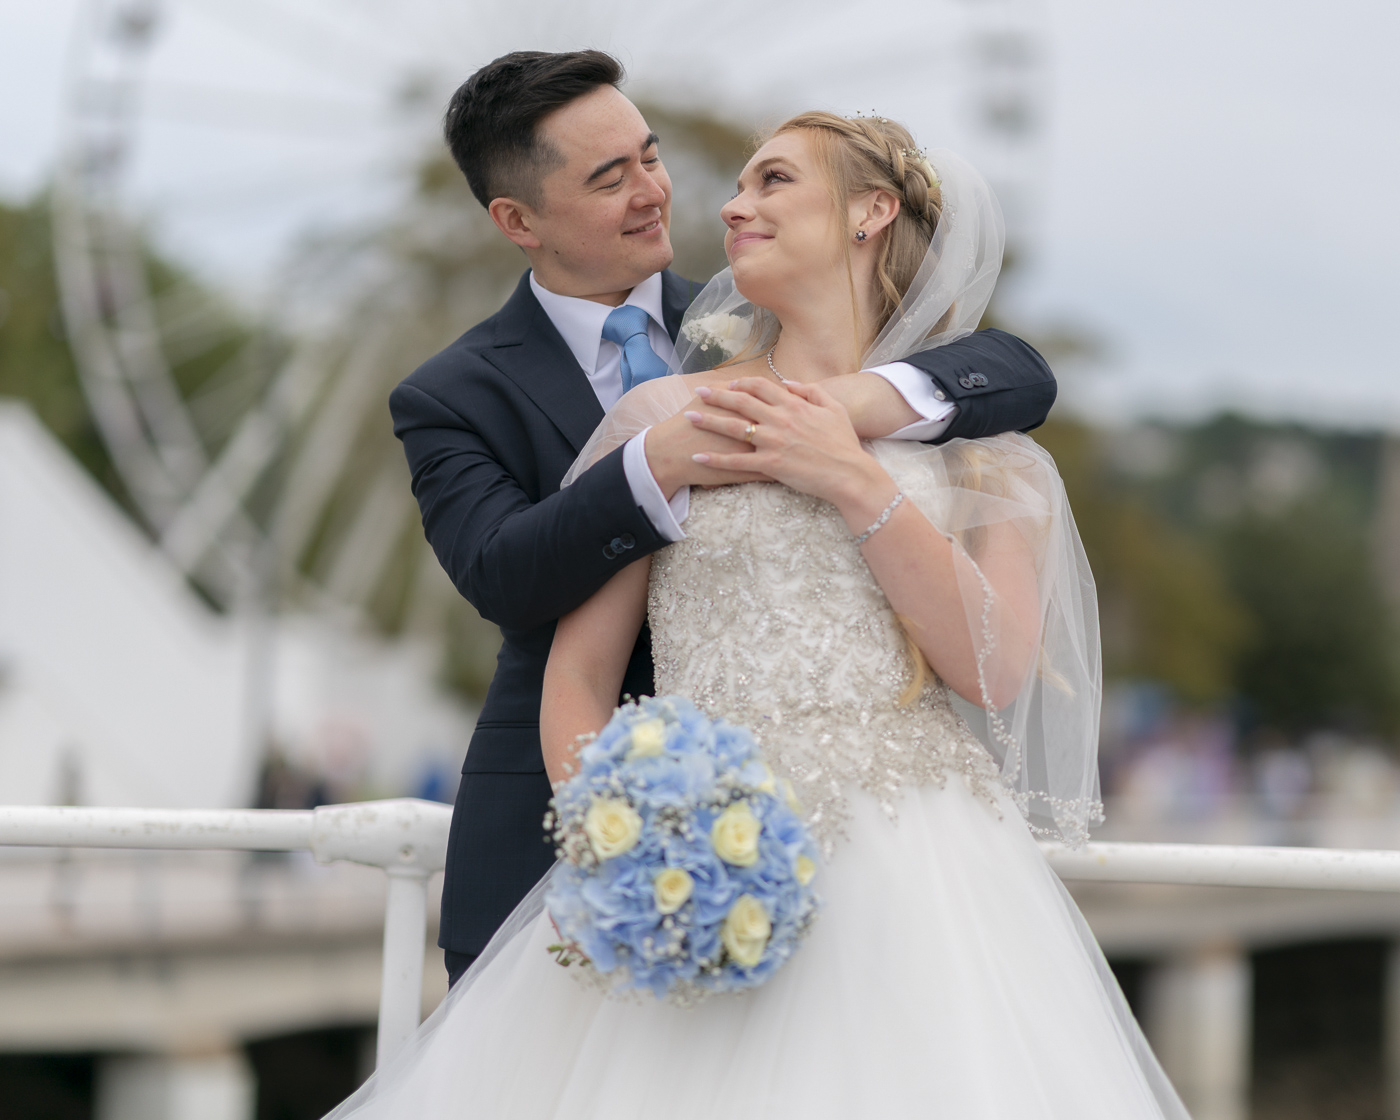 Bride and Groom on Torquay pier with big wheel in the background.